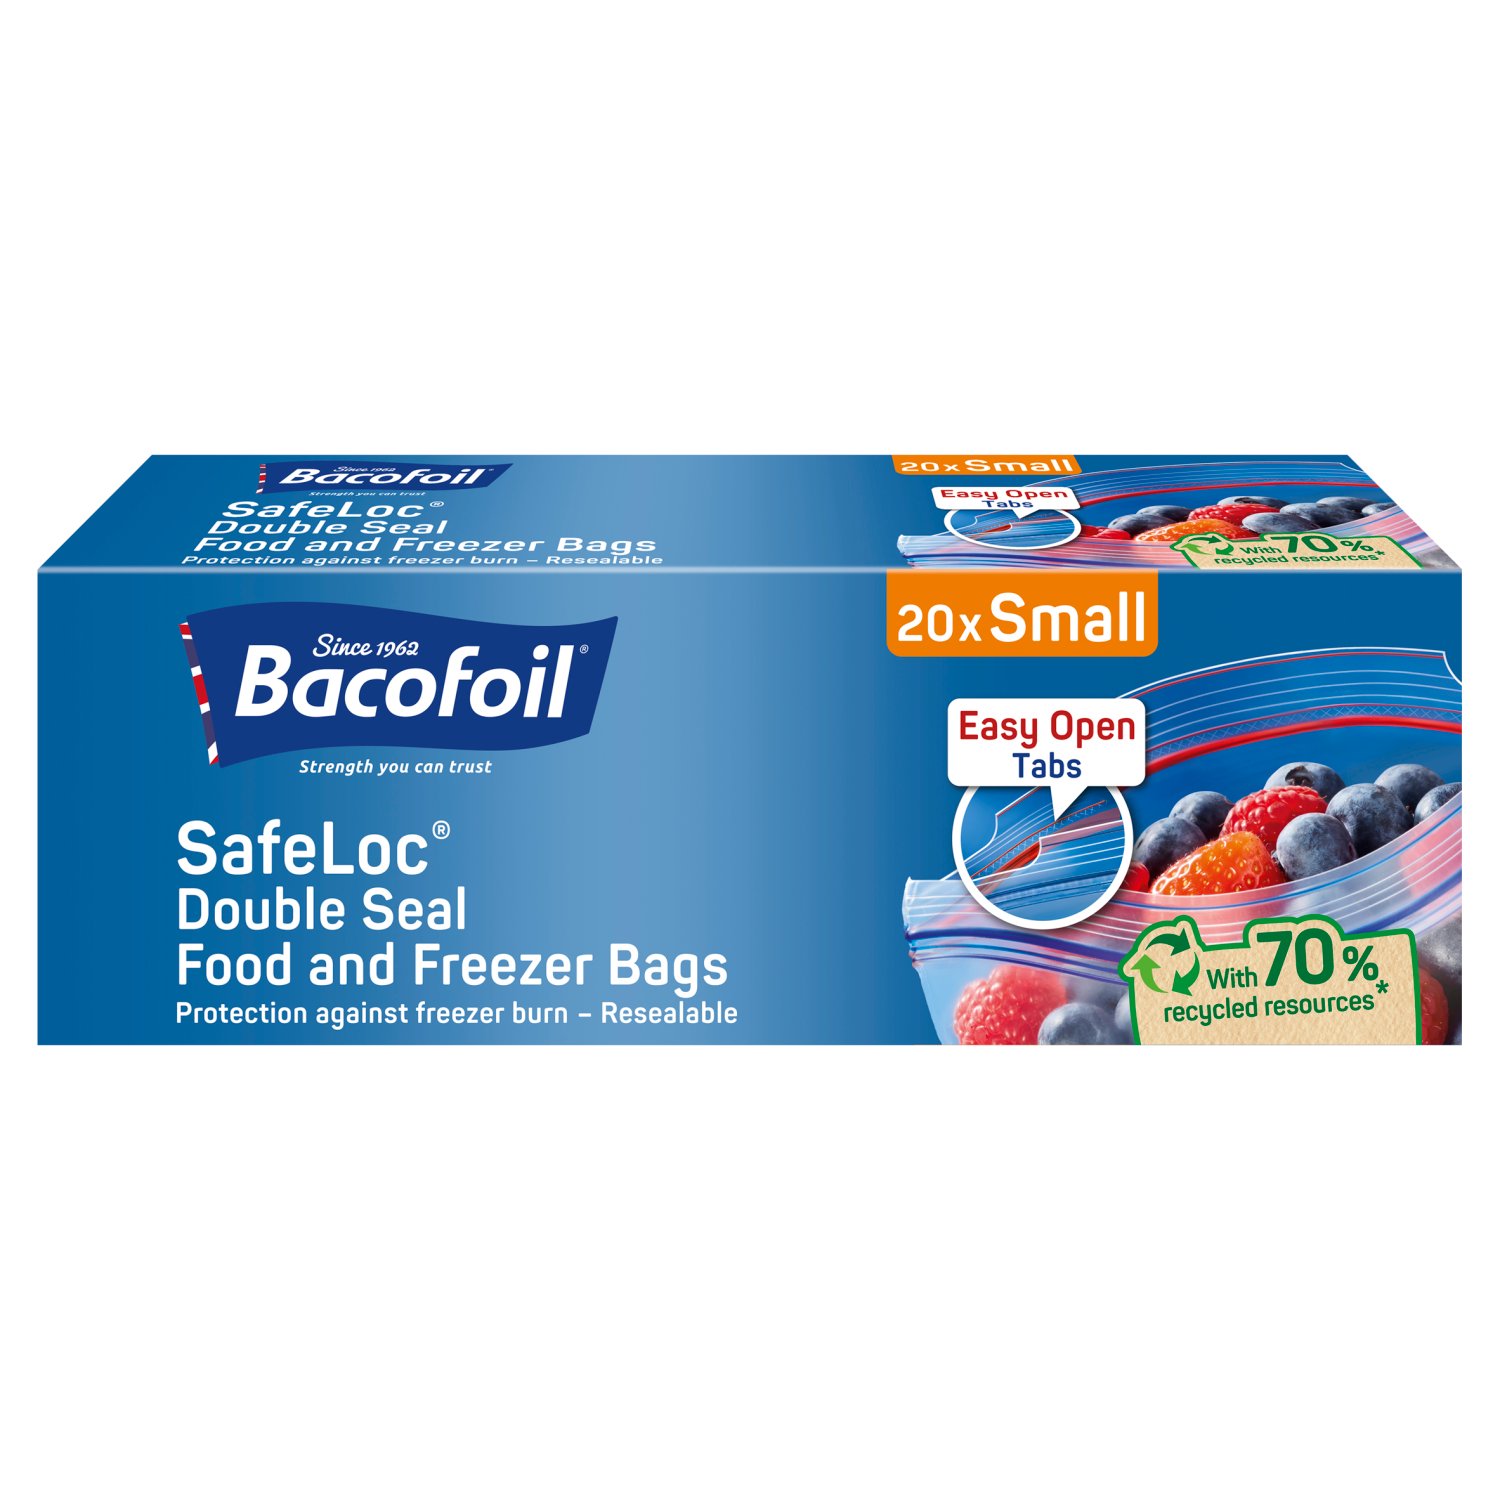 Bacofoil® SafeLoc® Double Seal Food and Freezer Bags with Easy Open tabs are a perfect addition to the kitchen for storing and freezing food. The bag’s integrated SafeLoc ® closure is simple to open and safe to re-close, allowing for easy portioning and secure protection of food – a must have in any household. Our Bacofoil® SafeLoc® Bags are now manufactured with 70% recycled and renewable raw materials! a key milestone on our journey to becoming a part of a circular economy.

Able to withstand temperatures from -40o to +90o they are ideal for households wanting to cook, store and freeze in large quantities. The Bacofoil® SafeLoc® Double Seal Bags also have a stand alone base making them easier to fill and are made from extra thick film to prevent leakages, tearing and Freezer burn.